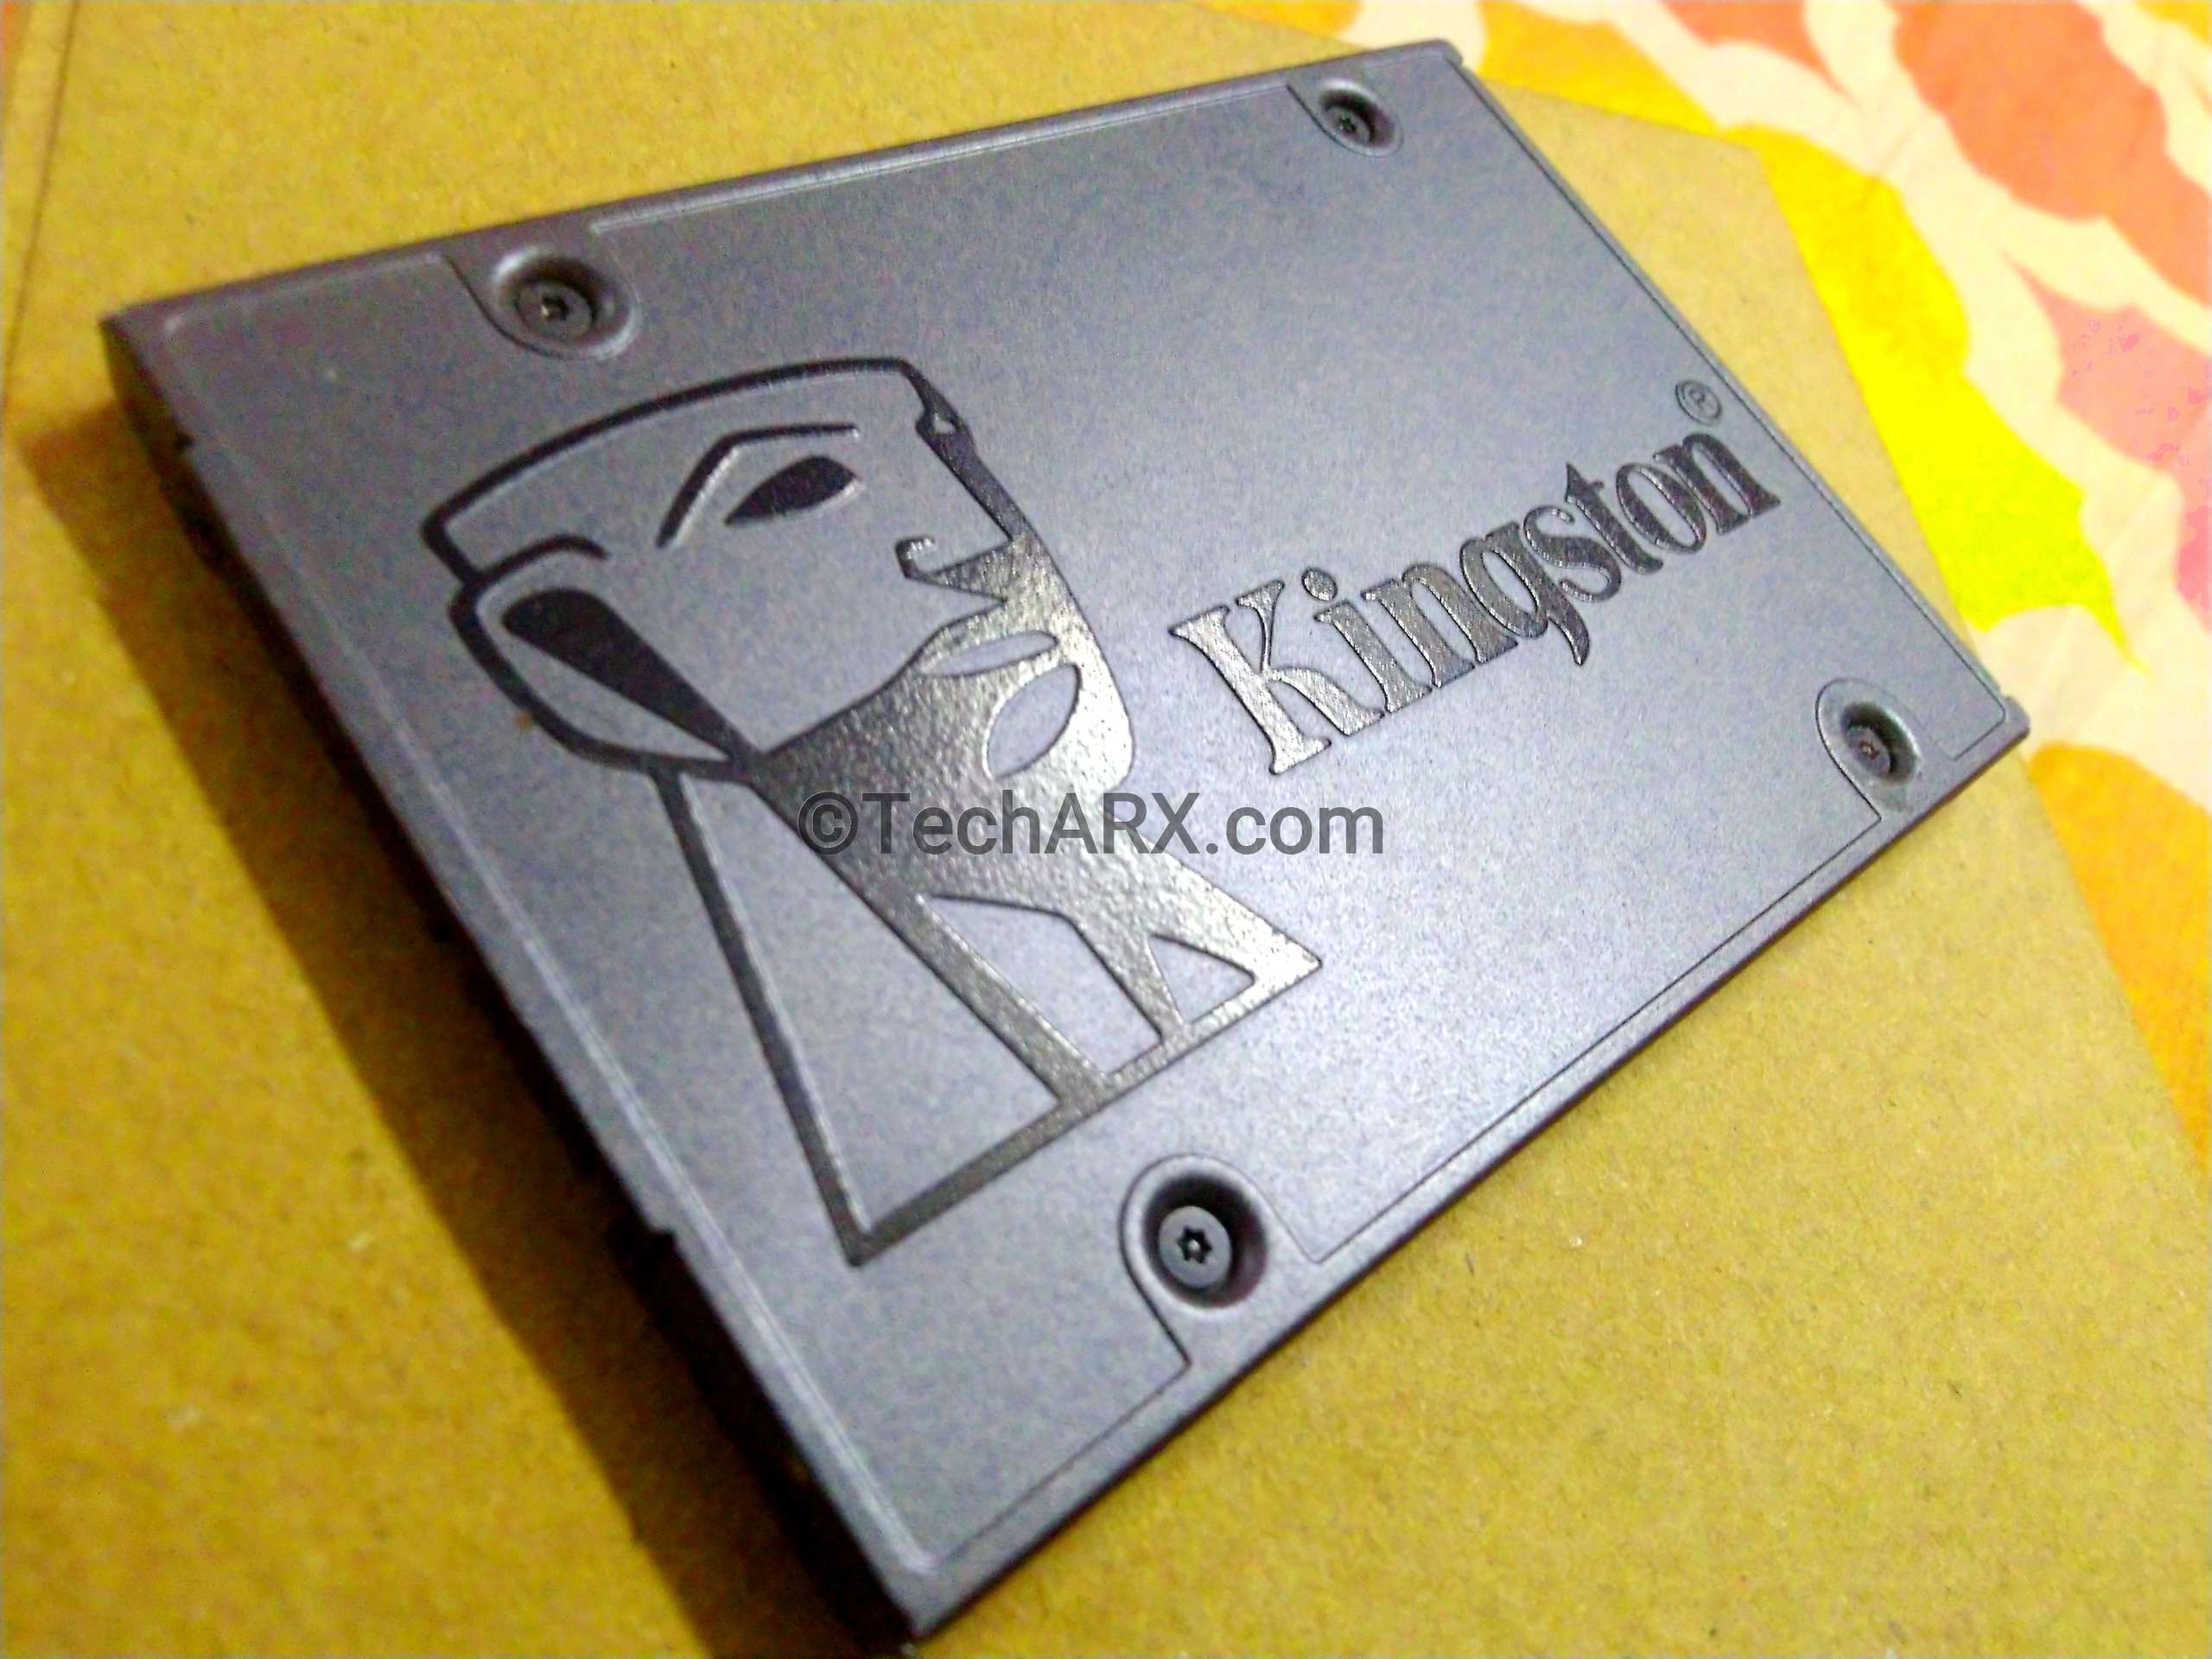 Kingston SSD 240GB Review : Fast Storage on a budget!